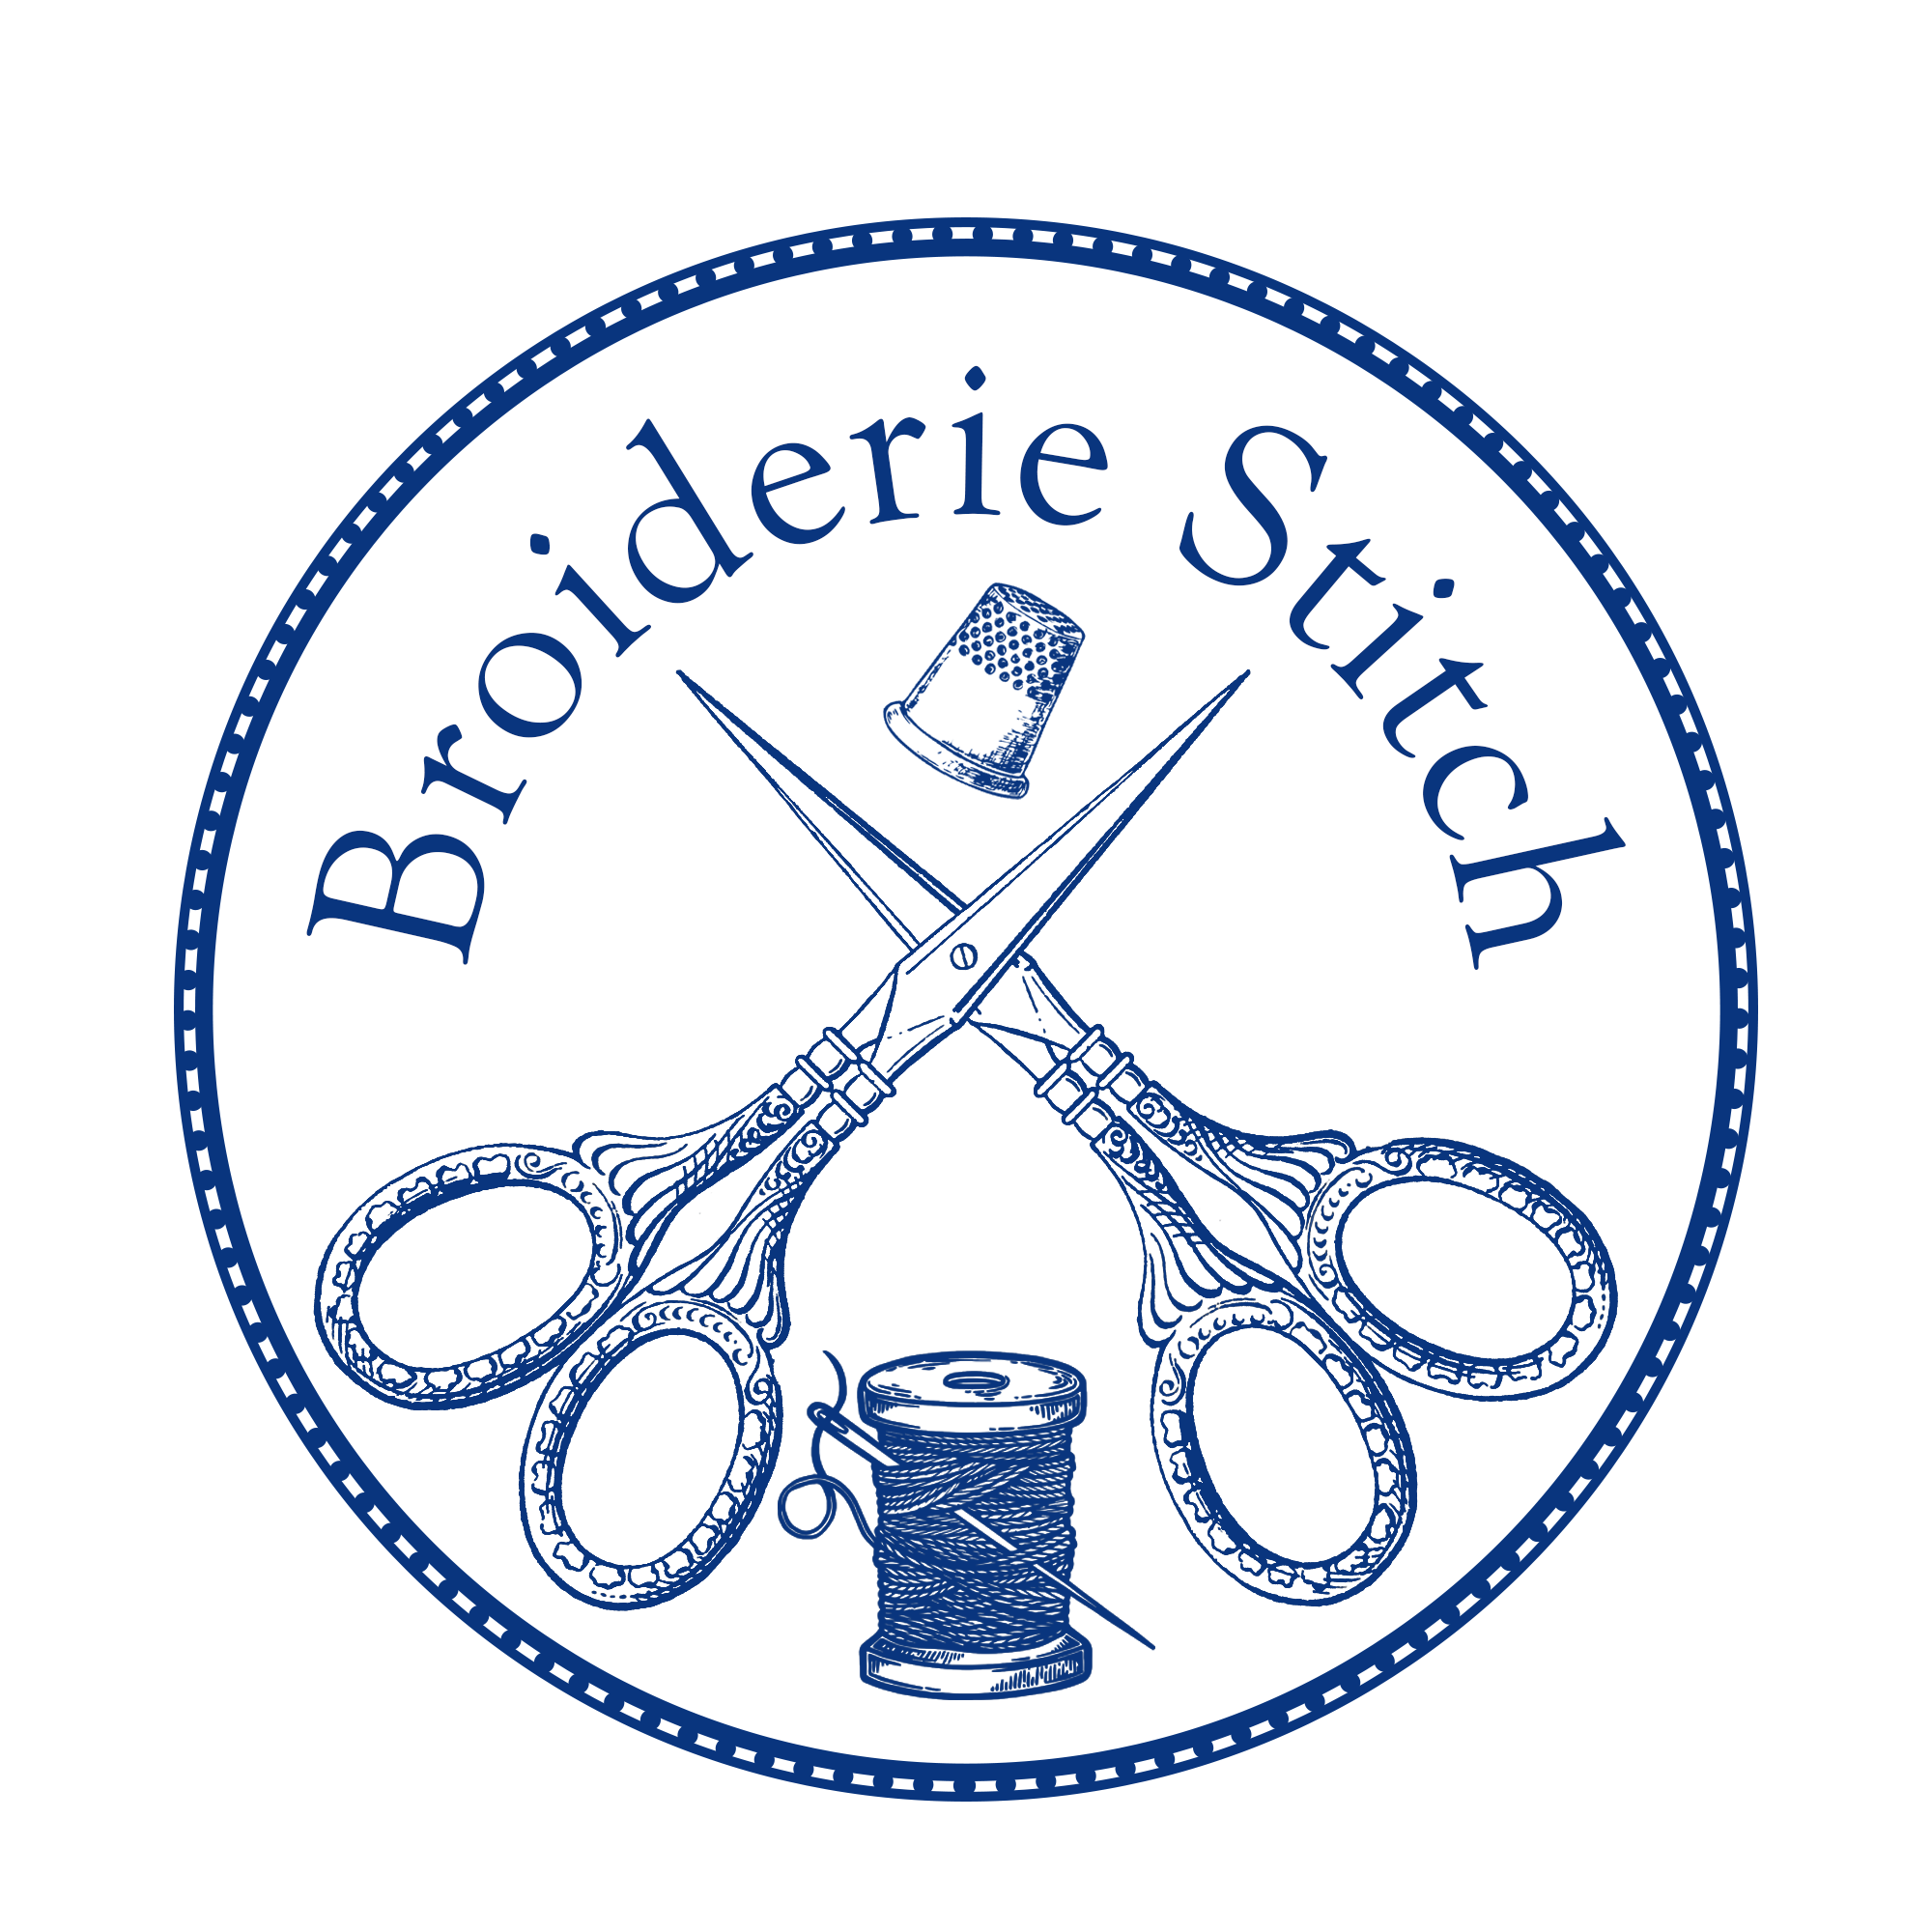 Circular emblem with "Broiderie Stitch" surmounting crossed embroidery scissors with spool of thread and thimble, in blue frame on white